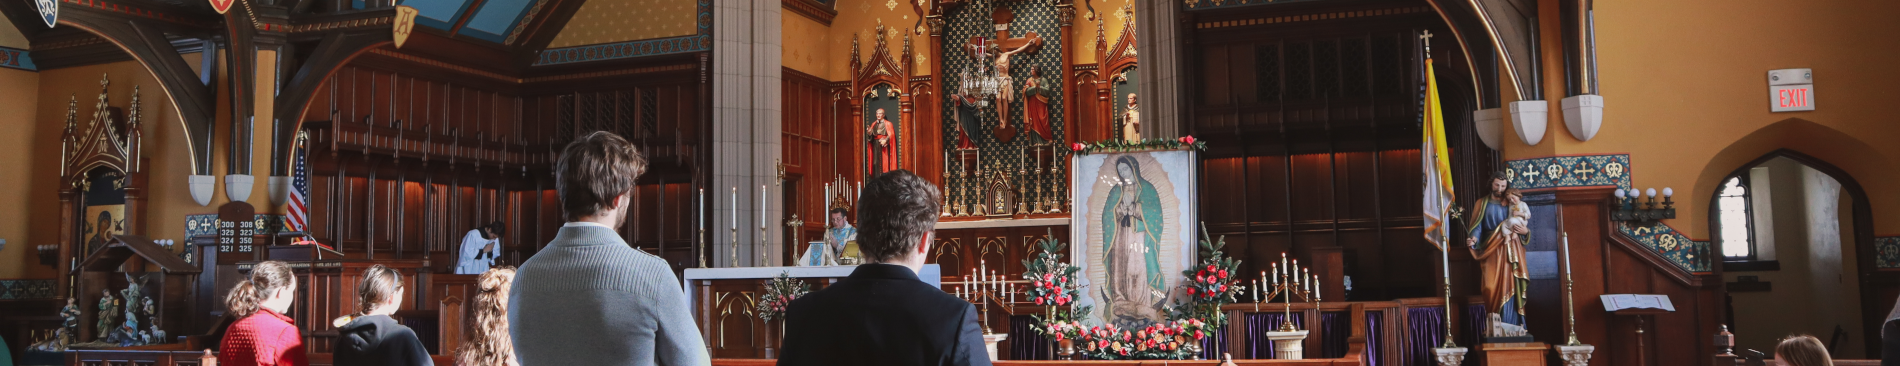 Feast of Our Lady of Guadalupe in Chapel